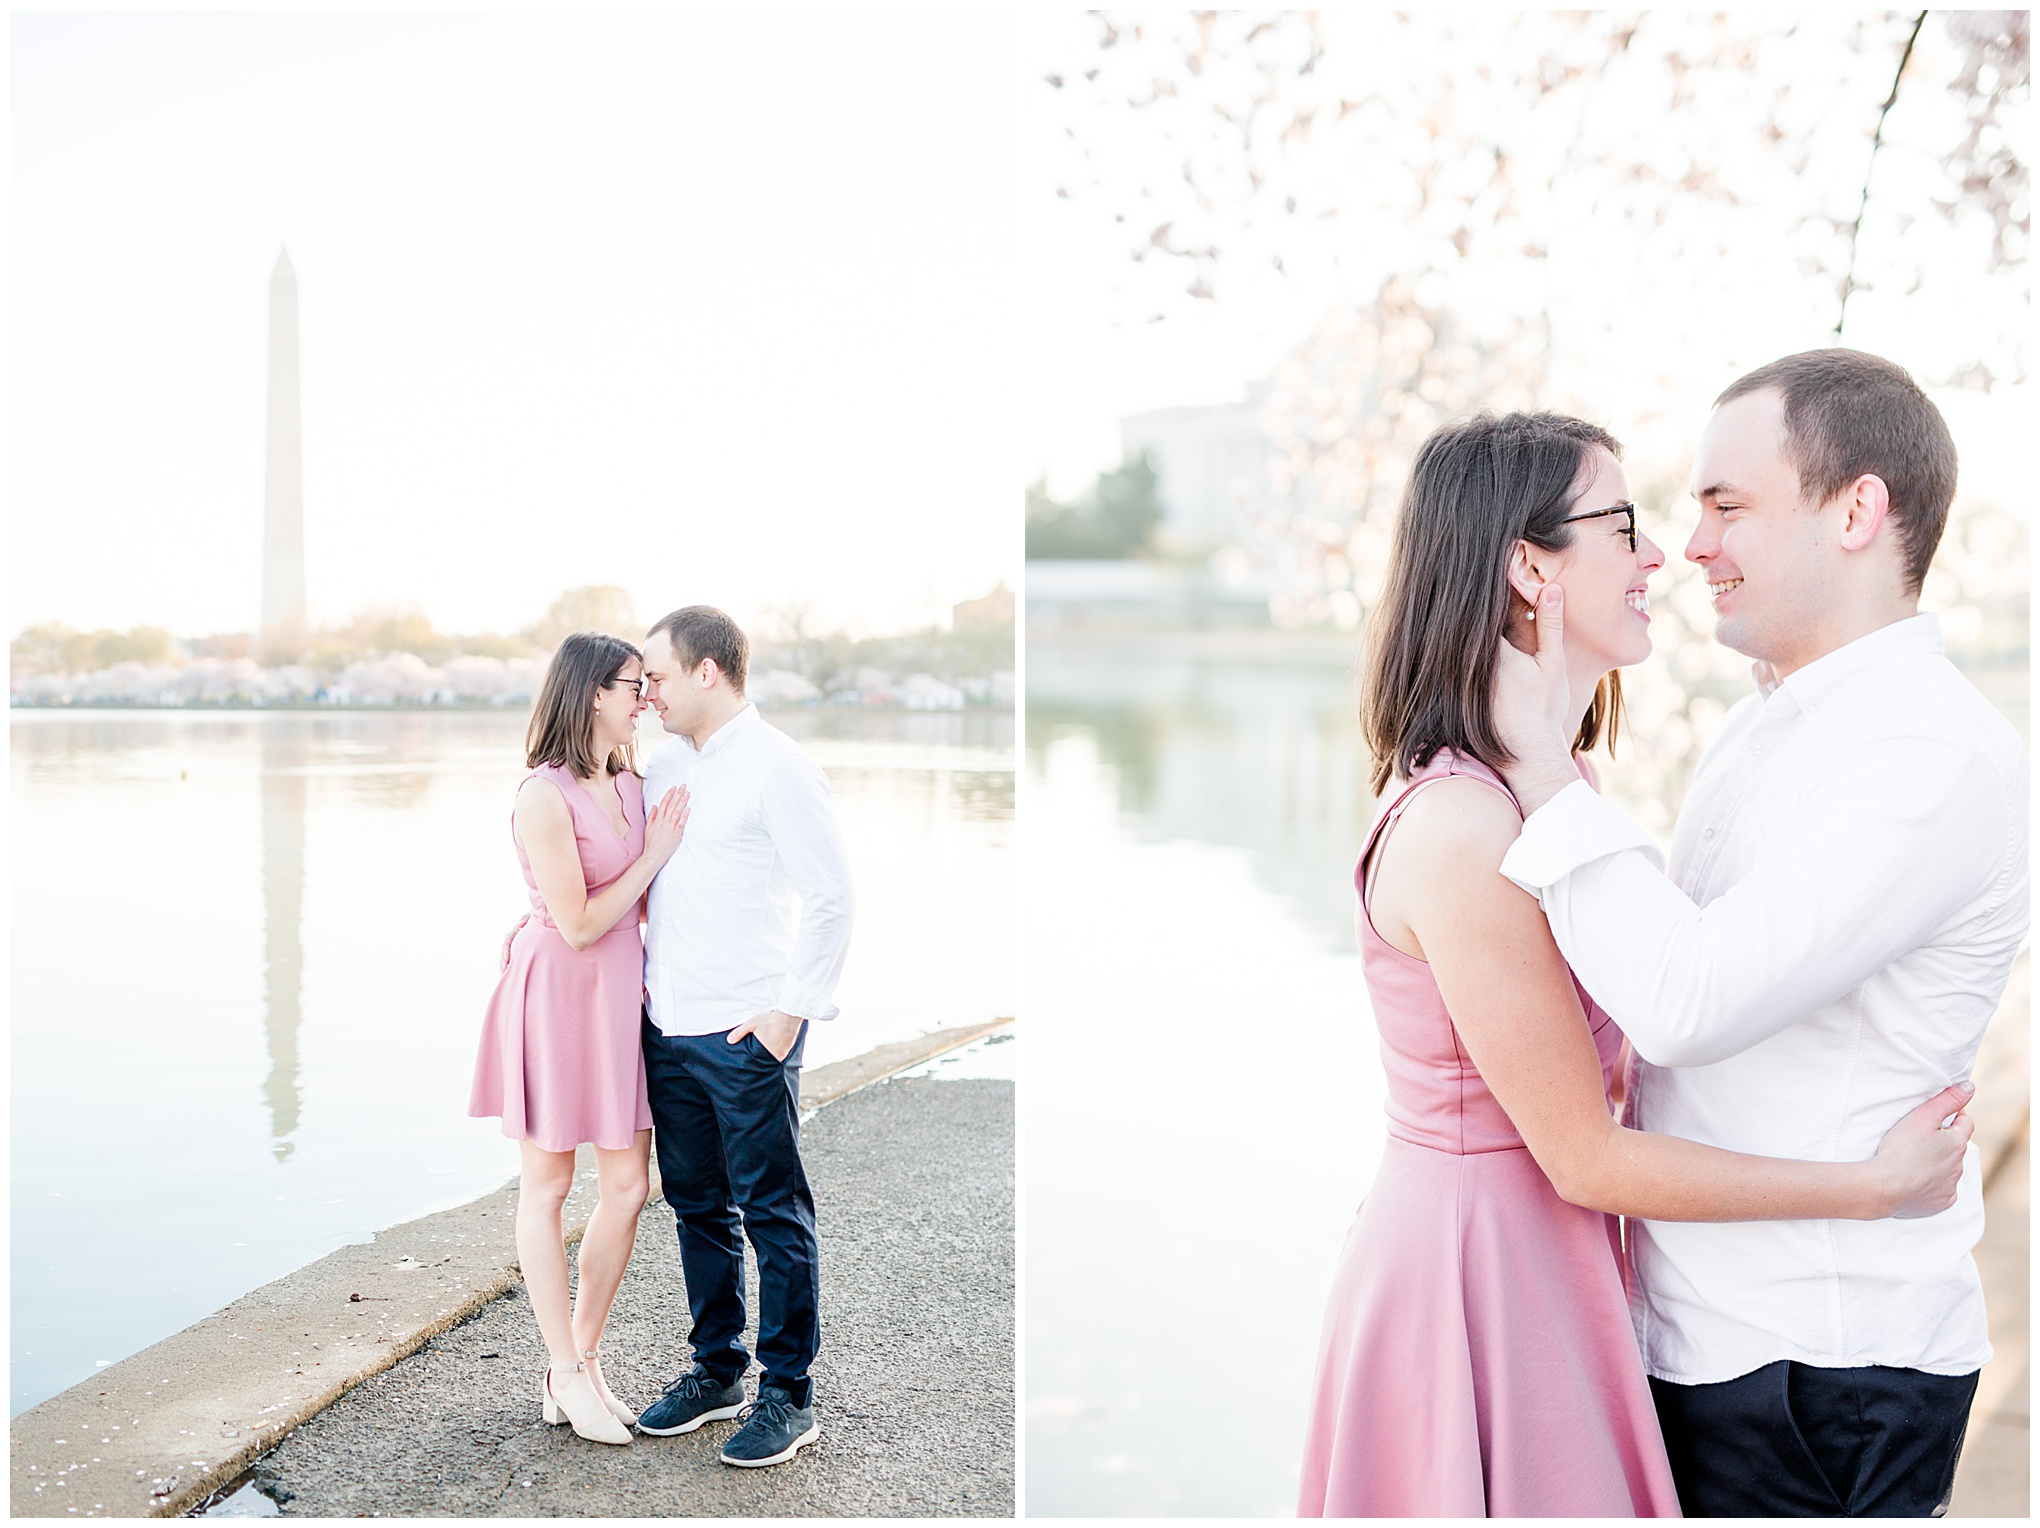 sunny cherry blossoms engagement session, Washington, D.C. engagement photos, Washington D.C. engagement photos, sunrrise engagement photos, cherry blossom engagement photos, D.C. cherry bloossoms, D.C. cherry blossoms photos, cherry blossom photos, cherry blossoms portrraits, sunny engagement photos, classic engagement photos, Rachel E.H. Photography, engagement session style, Washington Monument, Jefferson Memorial